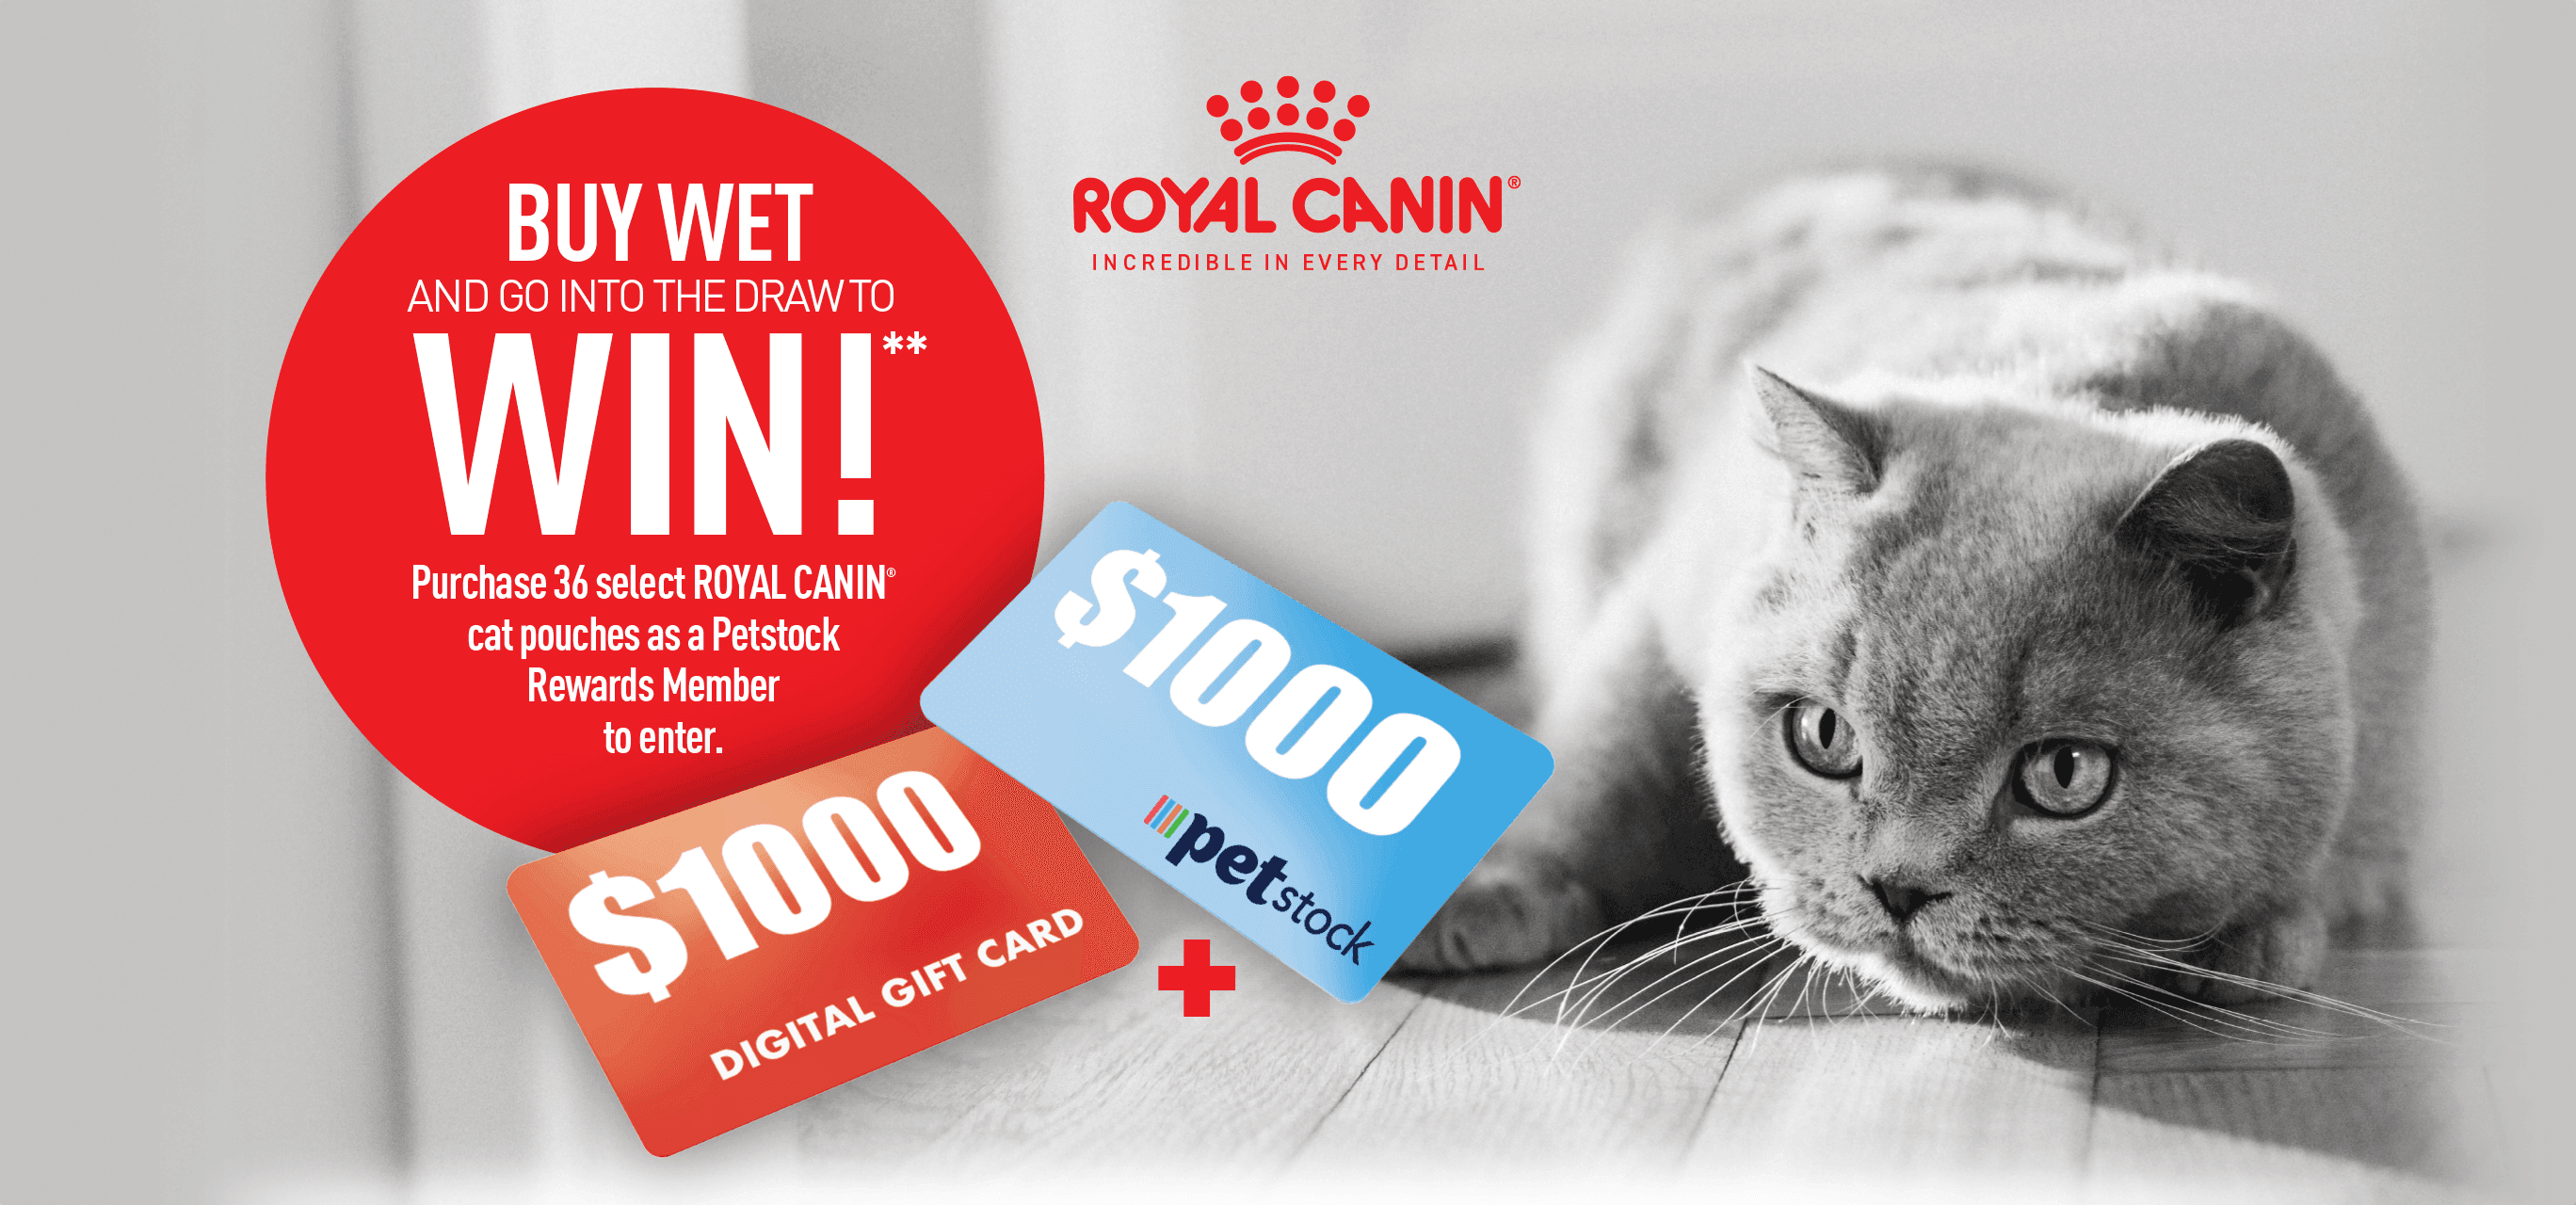 ROYAL CANIN - BUY WET & GO INTO THE DRAW TO WIN!